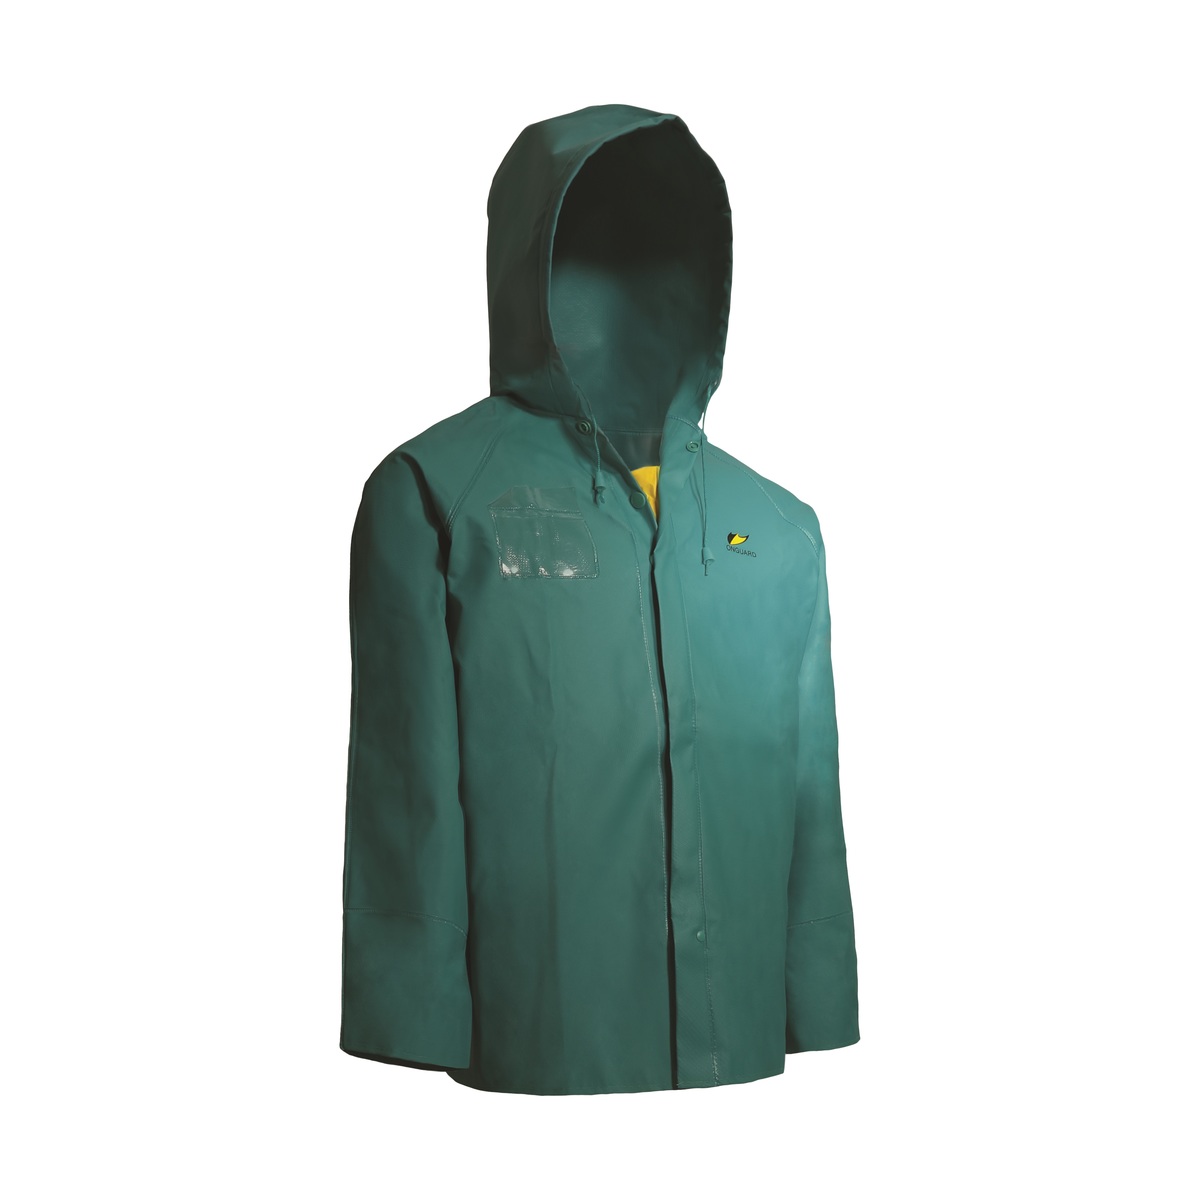 Dunlop® Protective Footwear Large Green Chemtex Nylon/Polyester/PVC Jacket With Hood